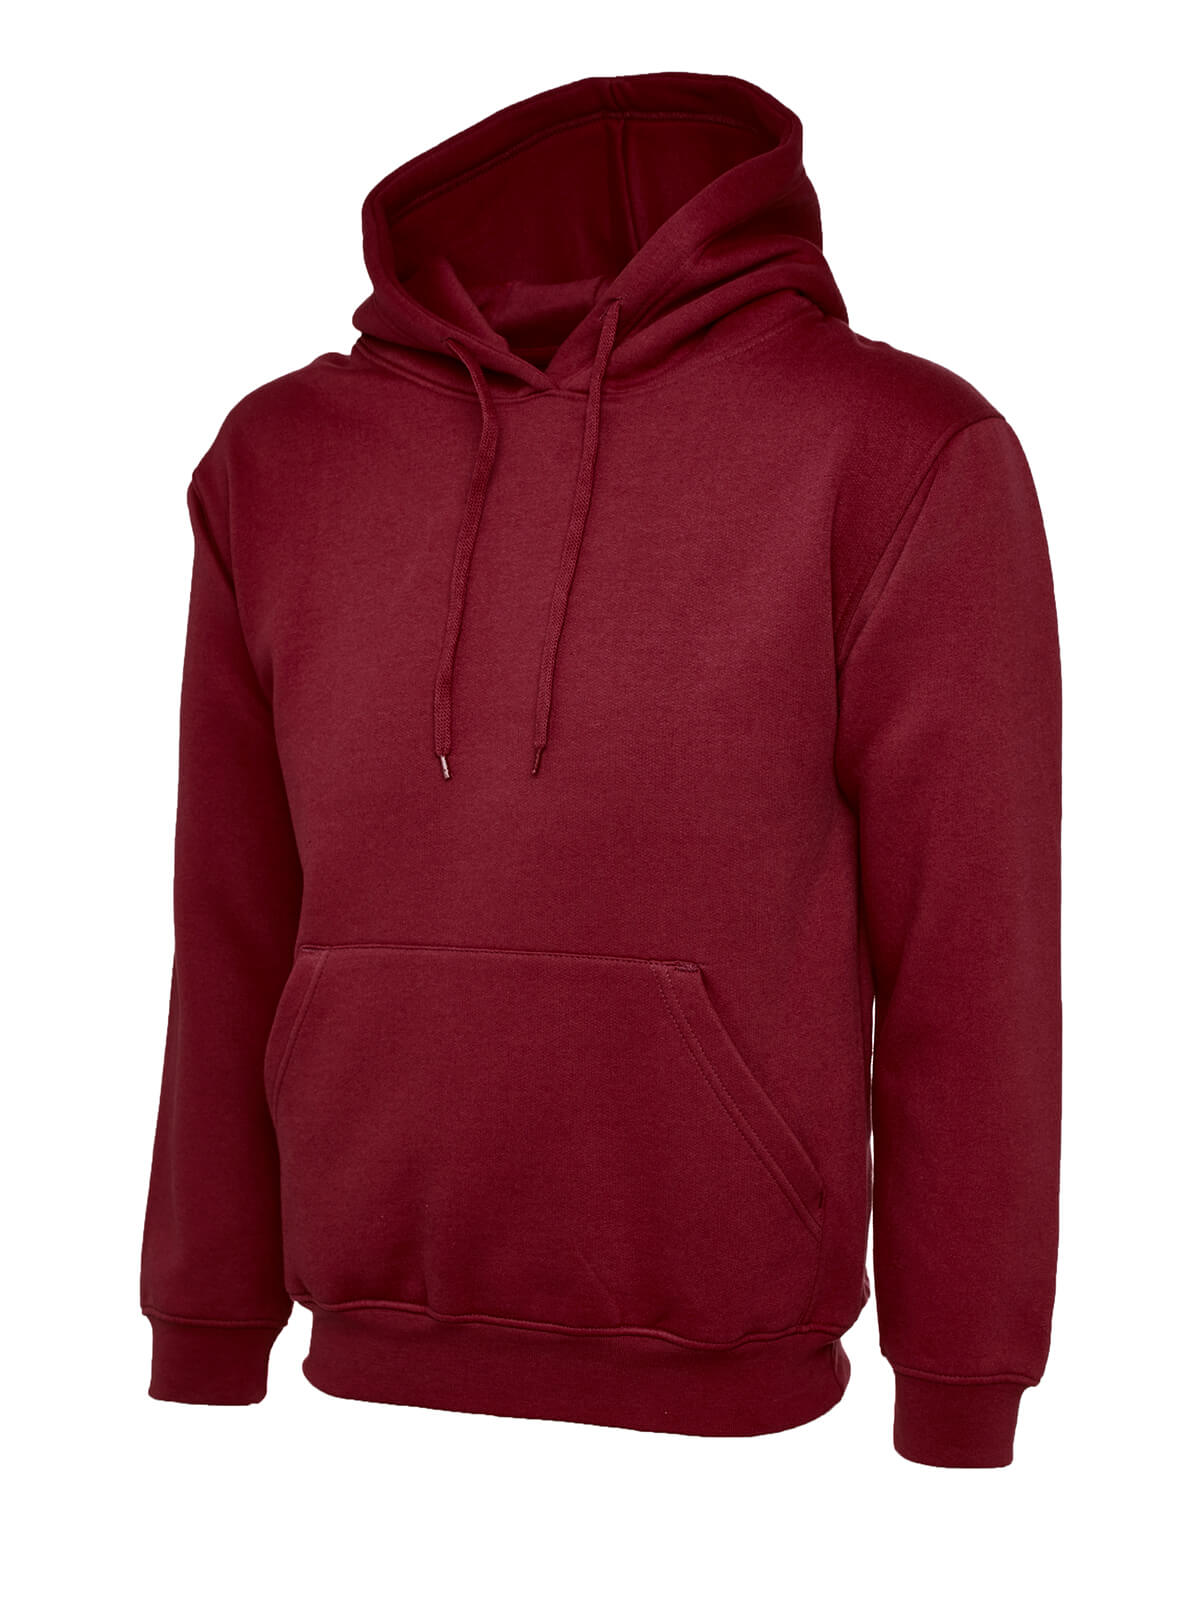 Plain Maroon Hooded Sweatshirt Jumper Pullover Double Fabric Soft Ribbed